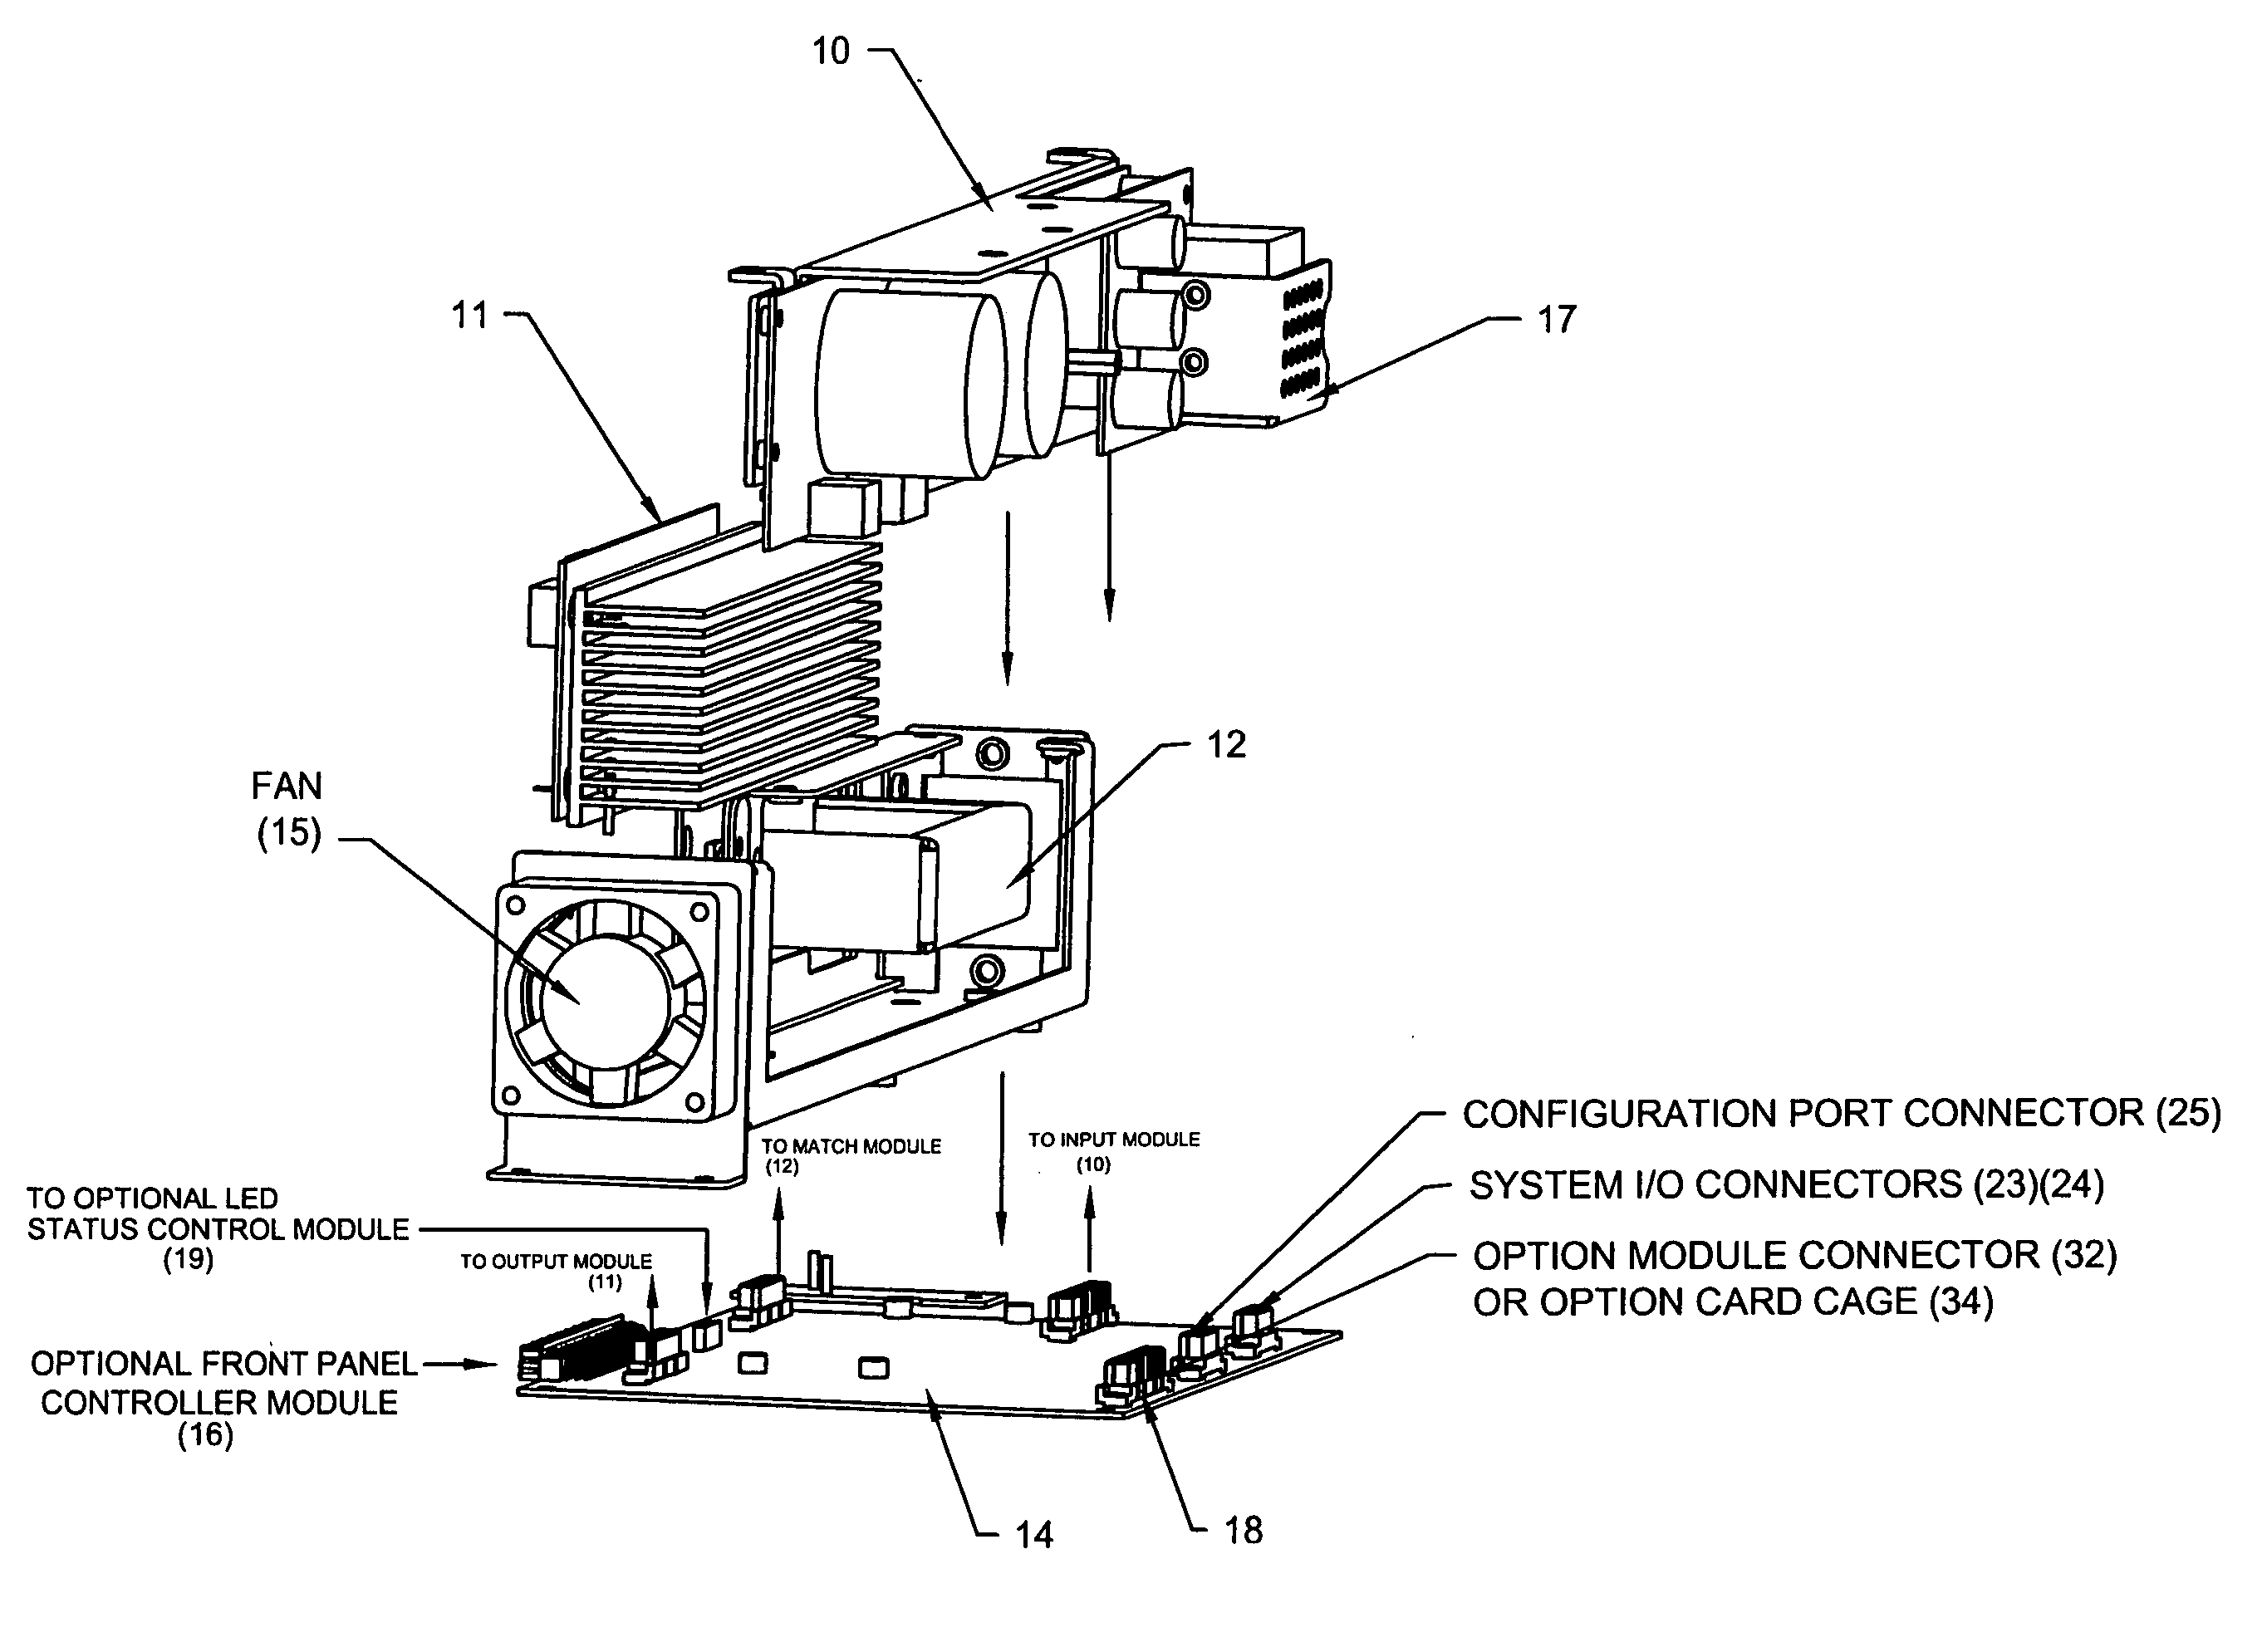 Systems for providing controlled power to ultrasonic welding probes